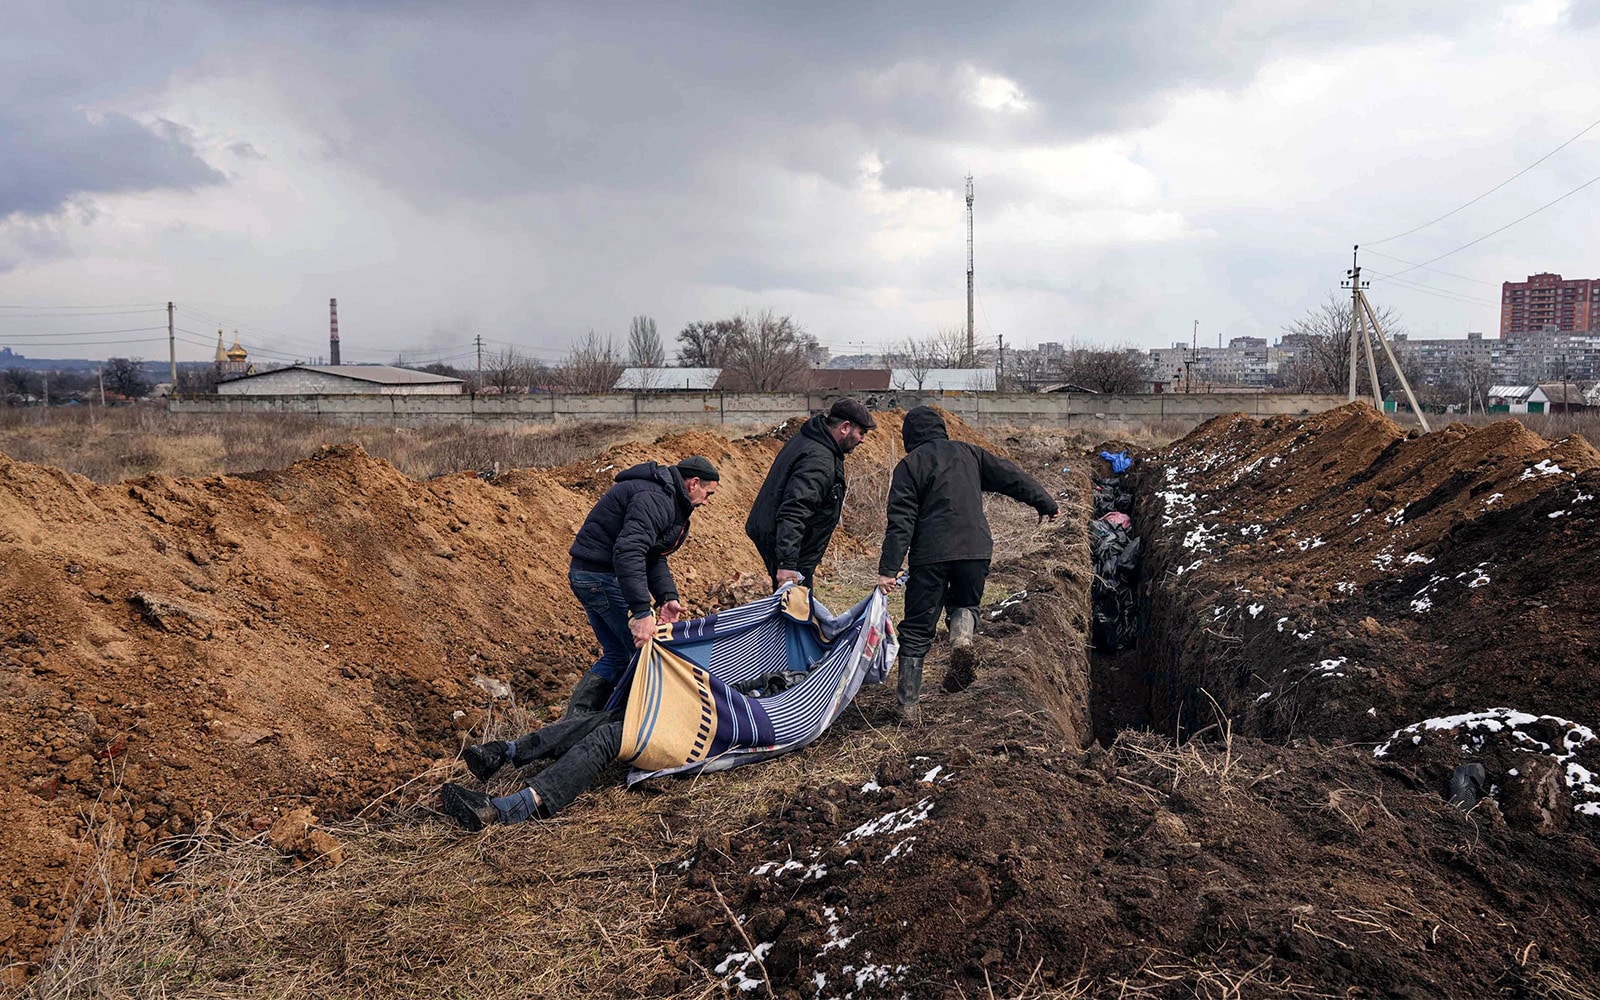 The New Babyn Yar: Russians buried probably up to 9,000 Mariupol residents in the Mariupol region